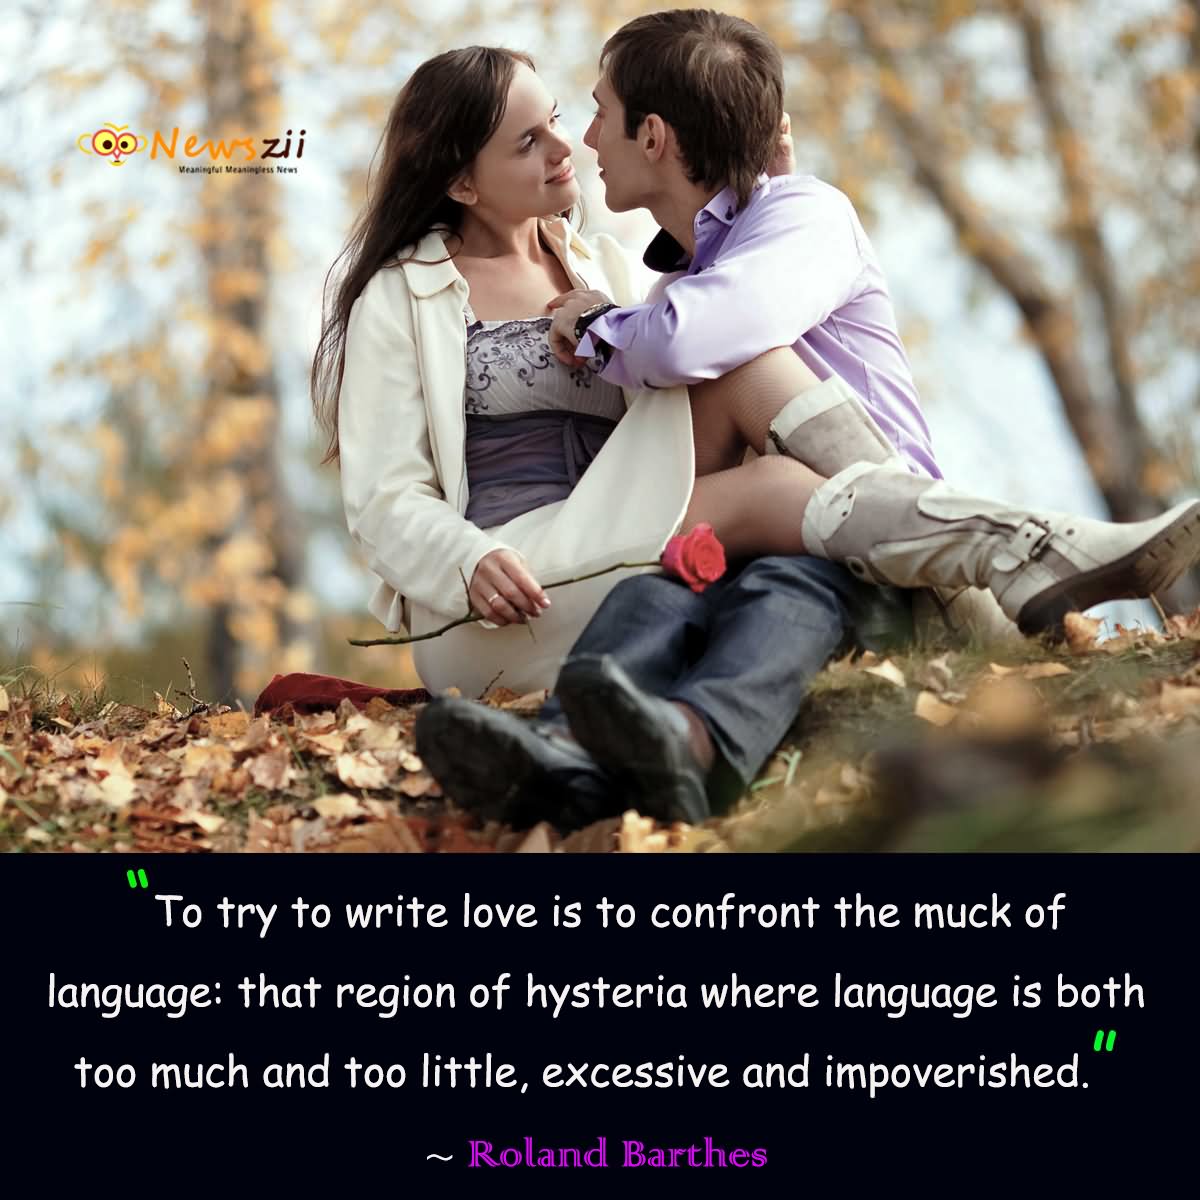 To try to write love is to confront the muck of language; that region of hysteria where language is both too much and too little, excessive and impoverished.